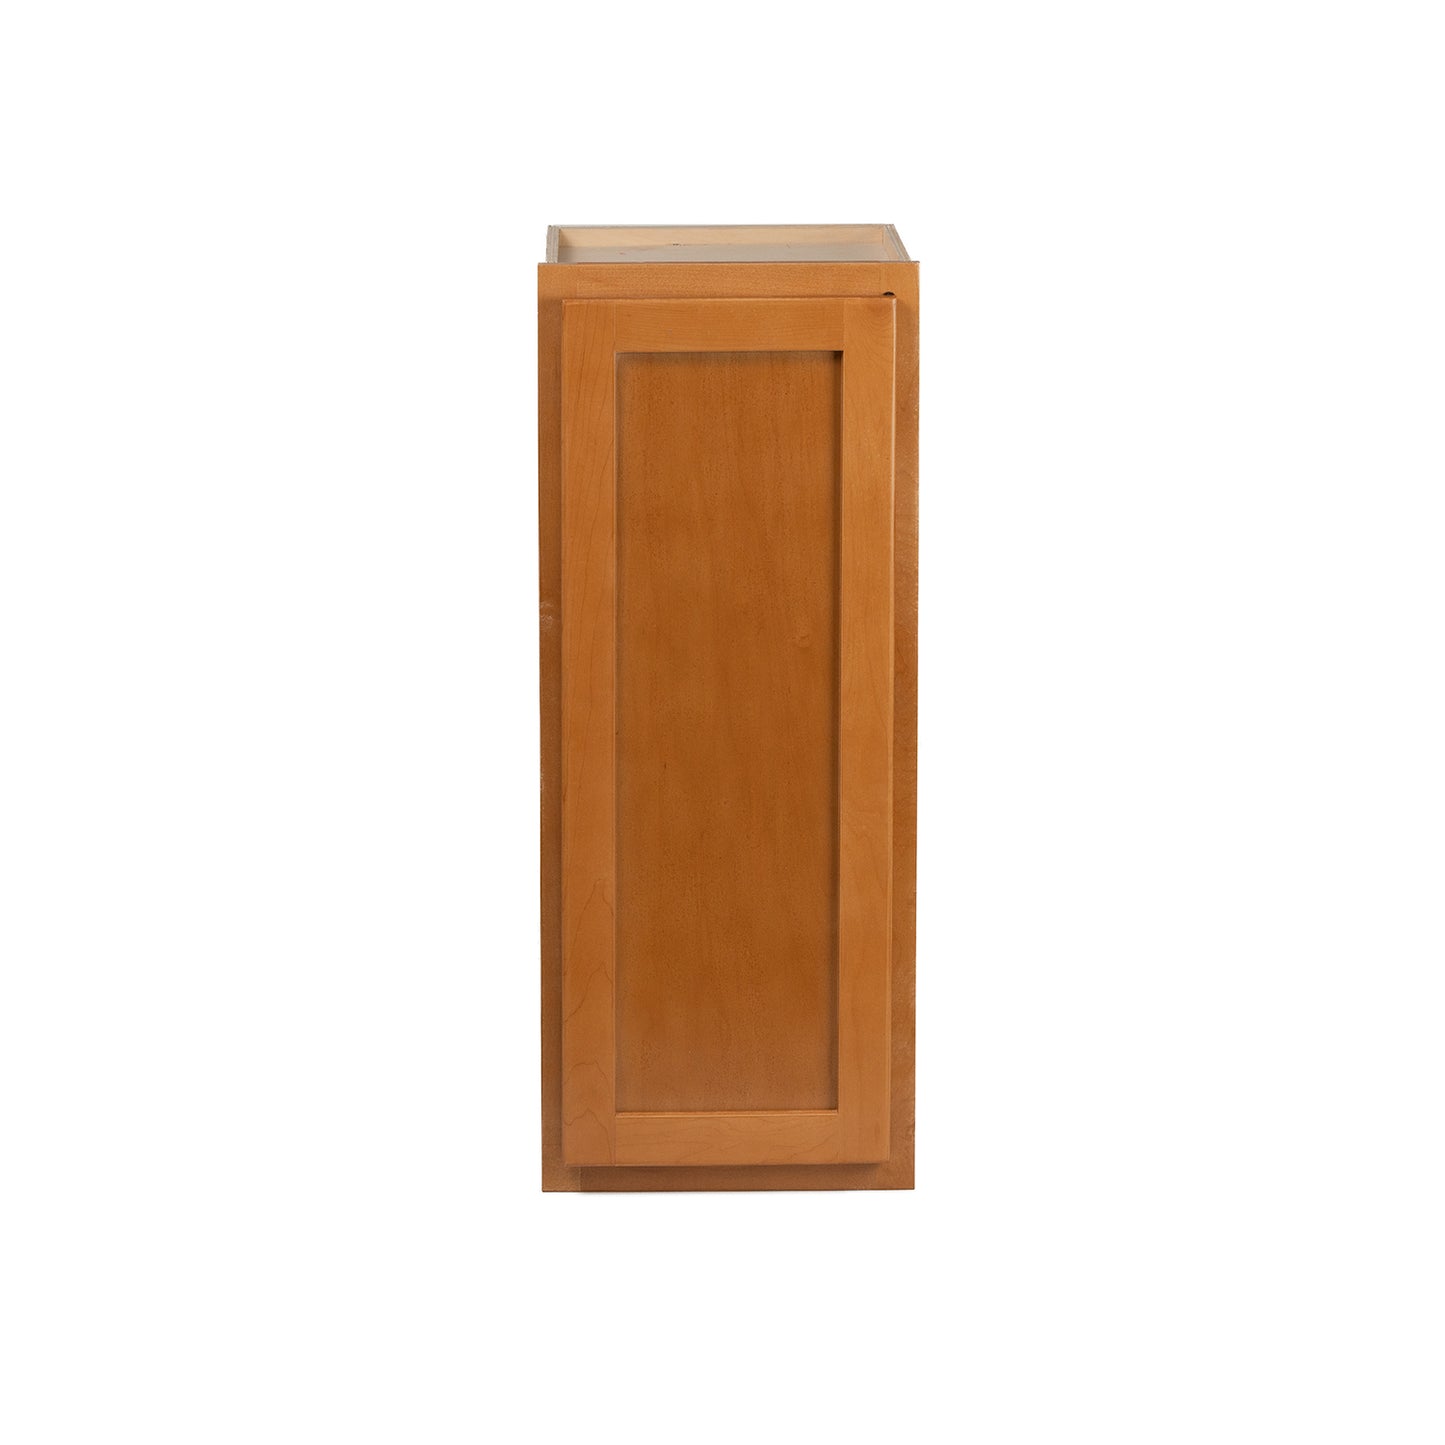 Quicklock RTA (Ready-to-Assemble) Provincial Stain 15"Wx36"Hx12"D Wall Cabinet